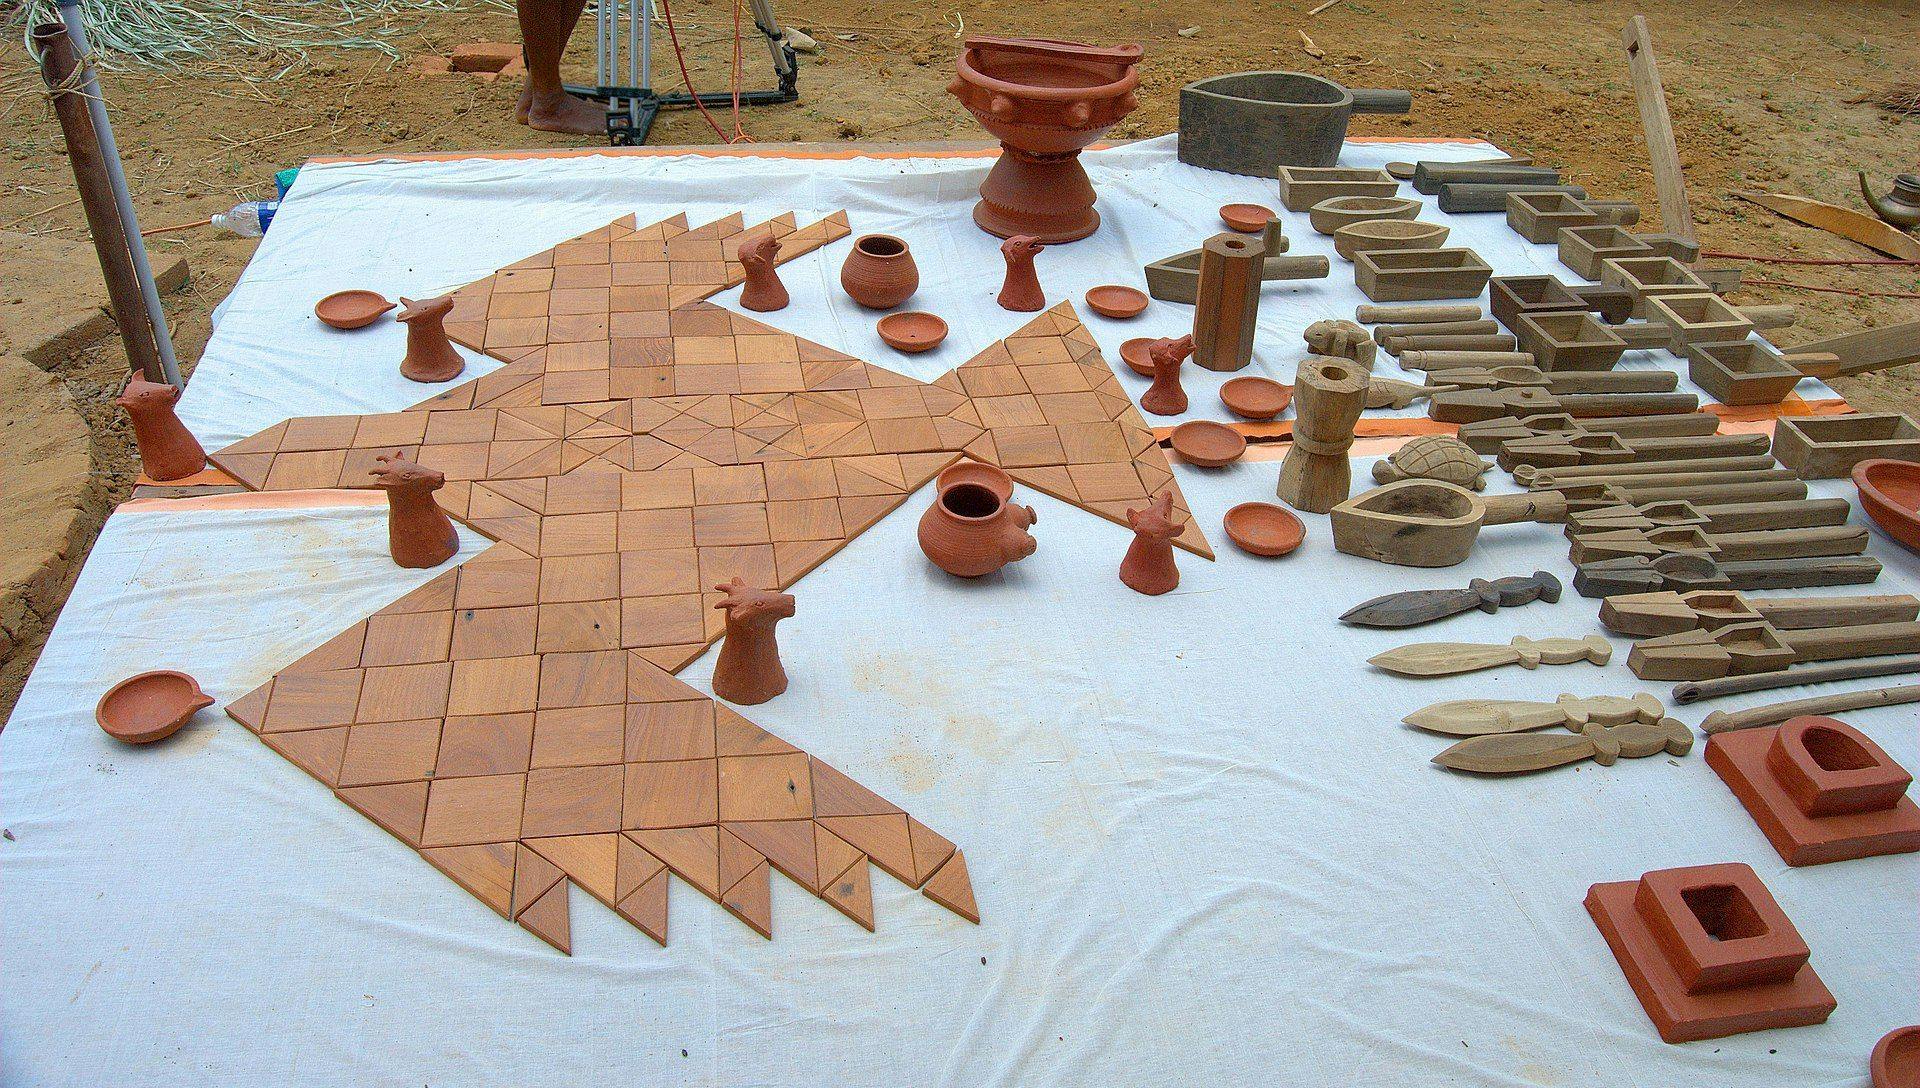 Modern replica of utensils and falcon/eagle shaped altar used for Vedic rituals, from the Kuru period